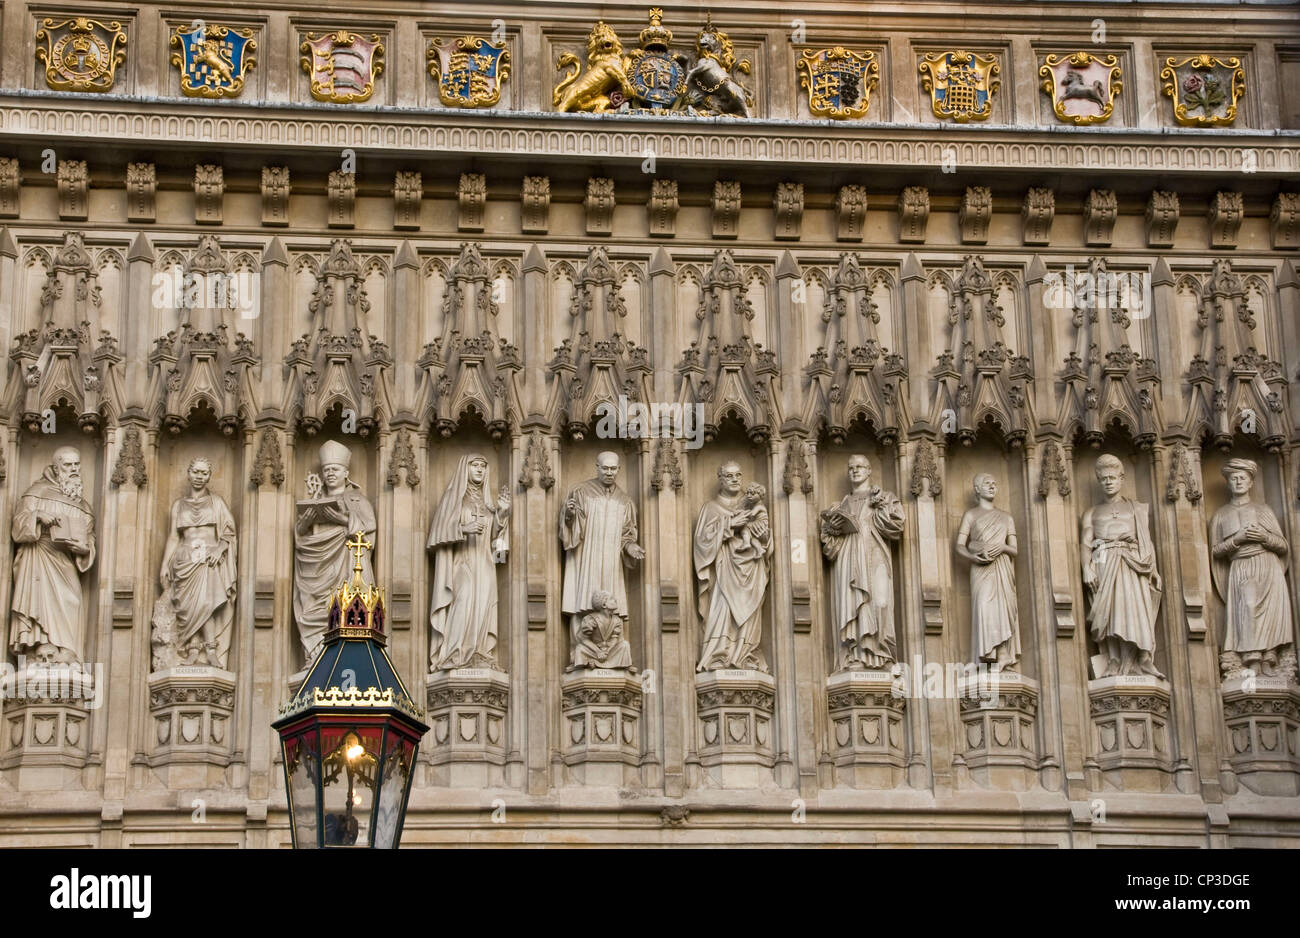 Sculptures carvings of 20th-century Christian martyrs in niches above the west door of Westminster Abbey London England Europe Stock Photo